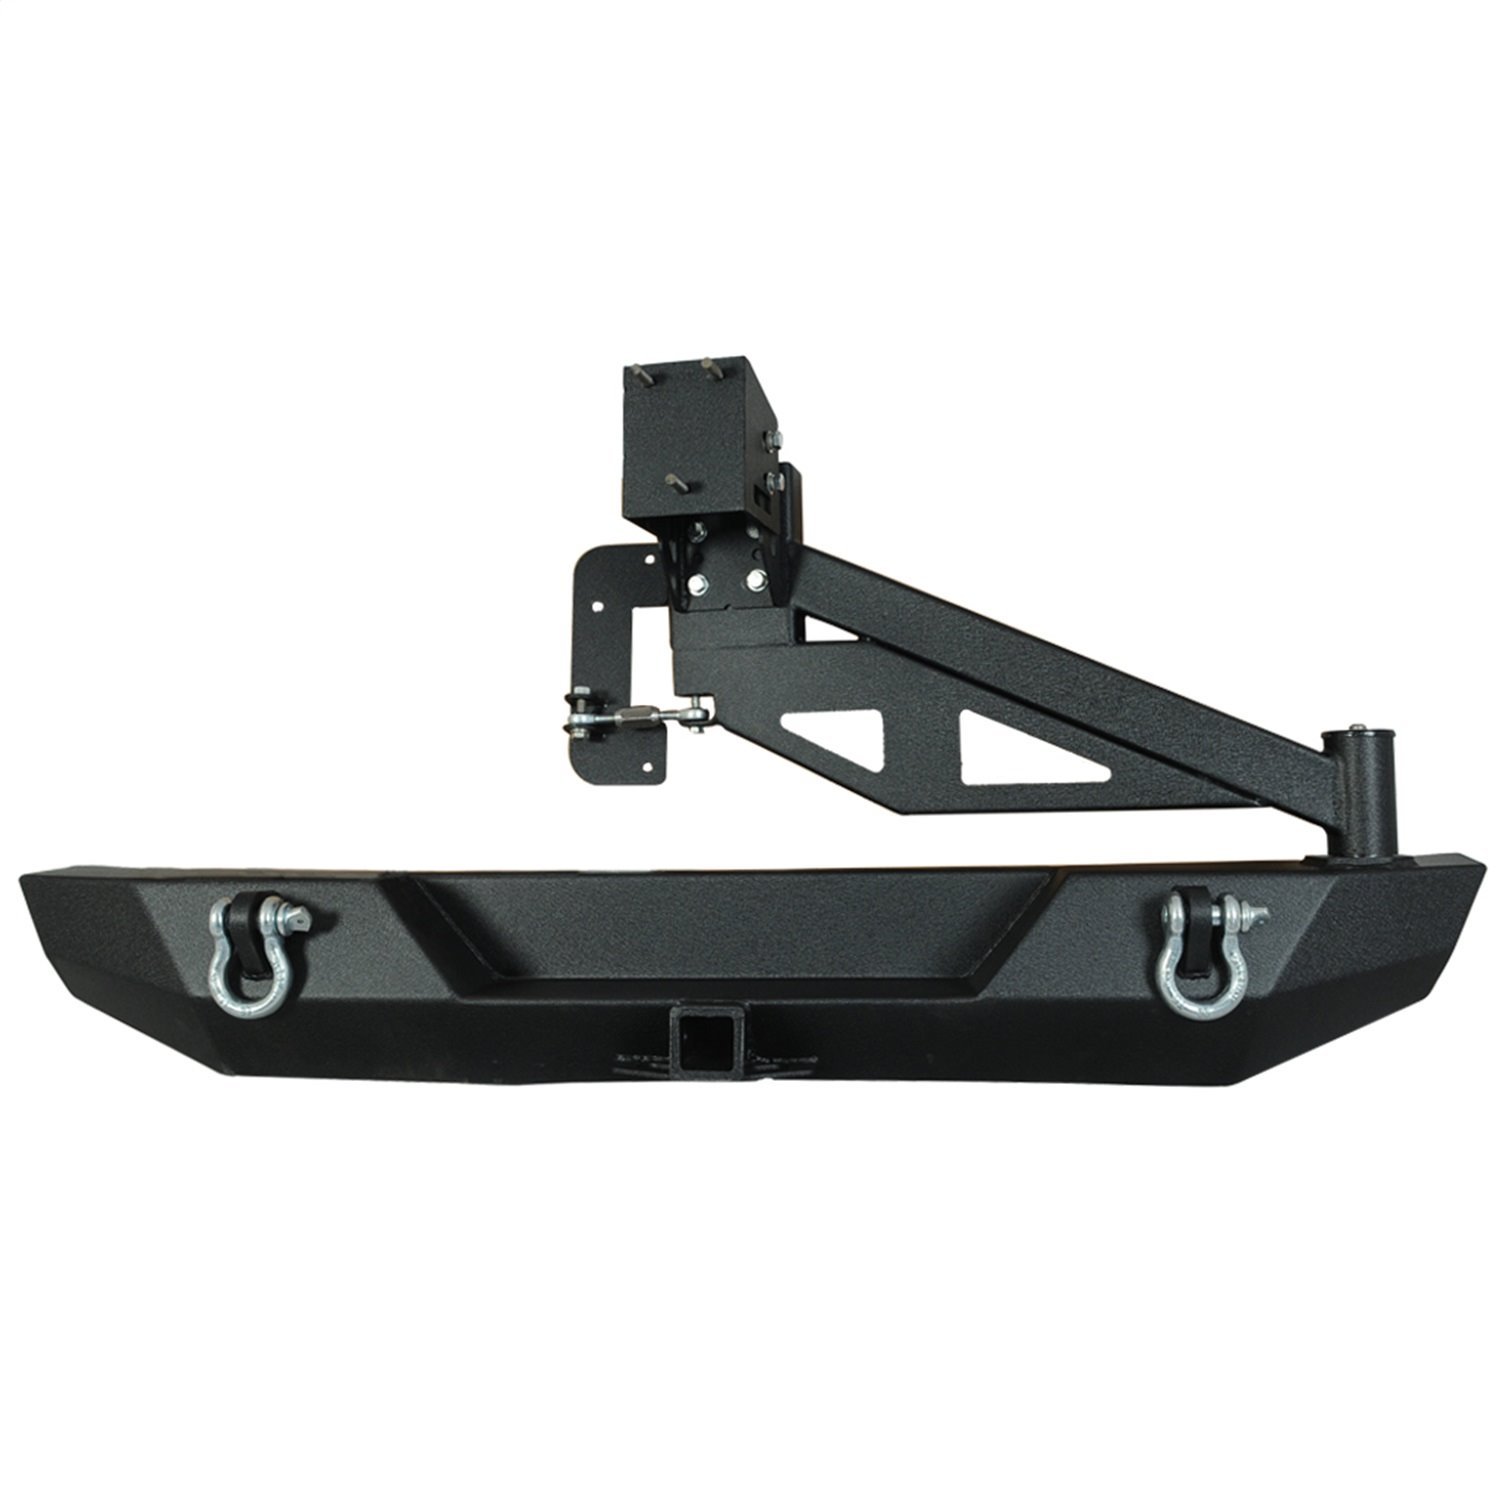 Body-Width Rear Bumper with Tailgate Tire Carrier Fits